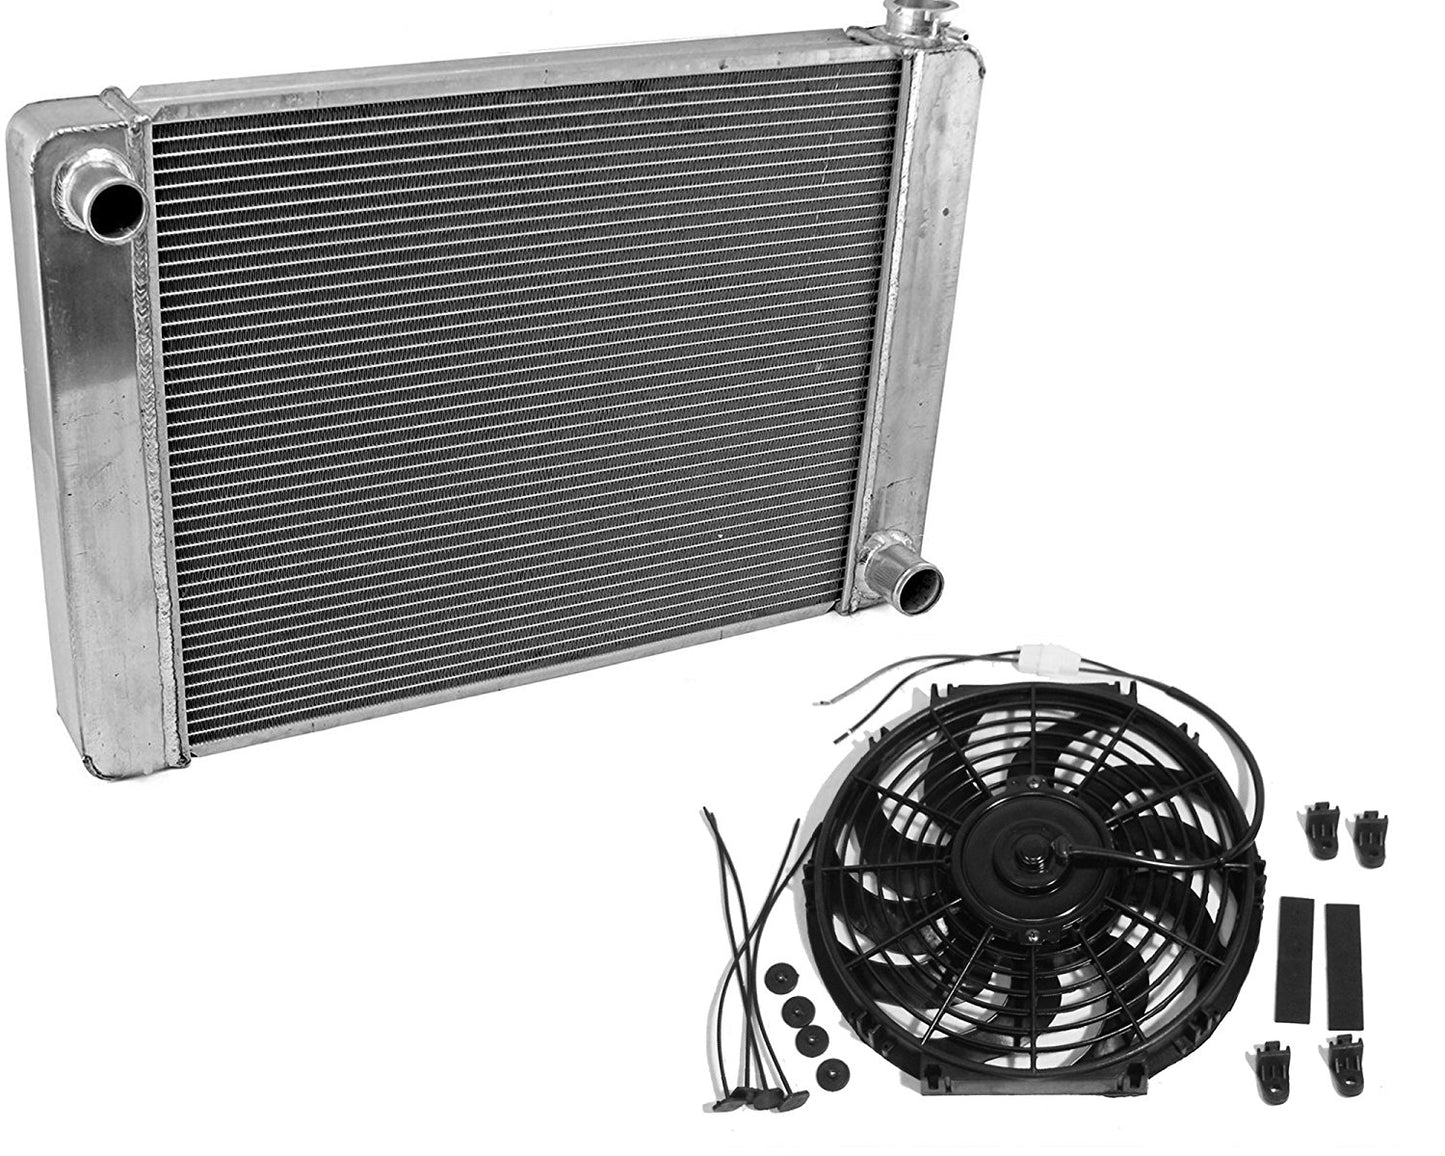 For SBC BBC Chevy GM Fabricated Aluminum Radiator 22" x 19" x3" Overall & 12" Electric Curved Blade Cooling Fan w/ Mounting Kit